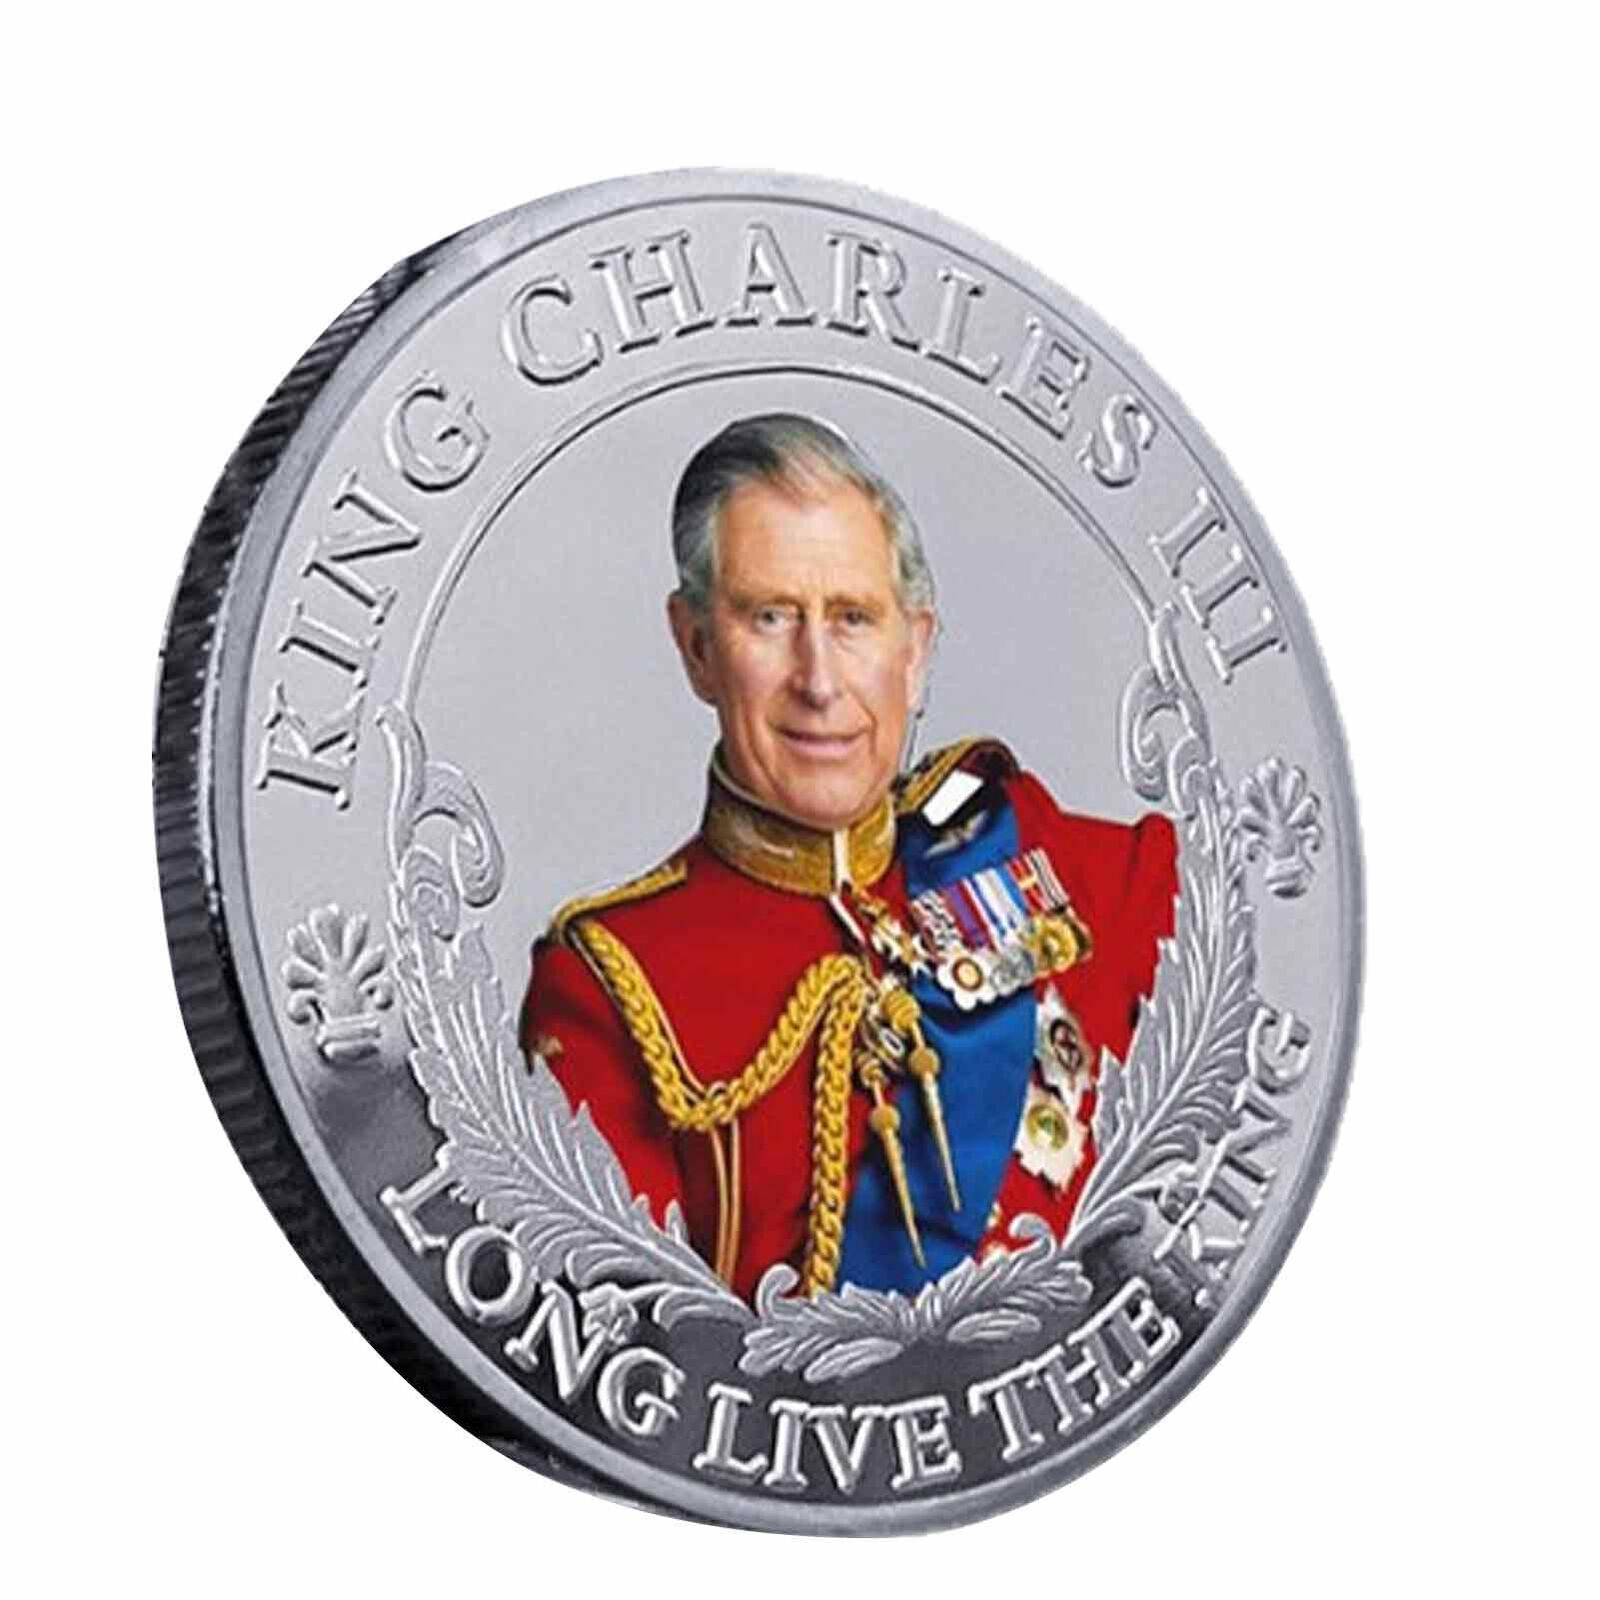 King Charles III Metal Commemorative Coin British Royal Souvenir Gift Collection